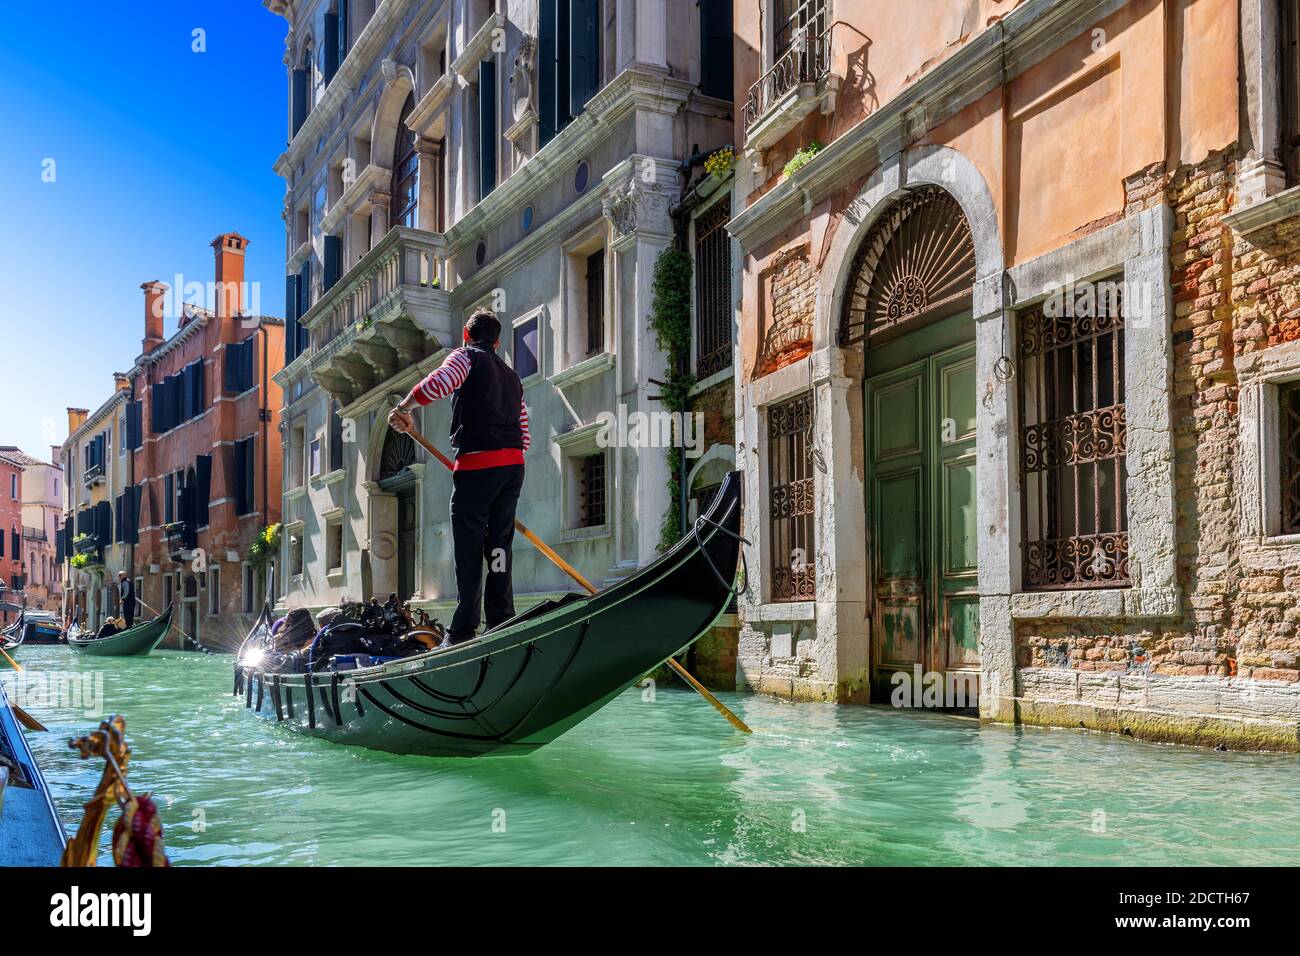 A Venetian gondolier rules a gondola Through the waters of the Venice canal, Venice, Italy Stock Photo